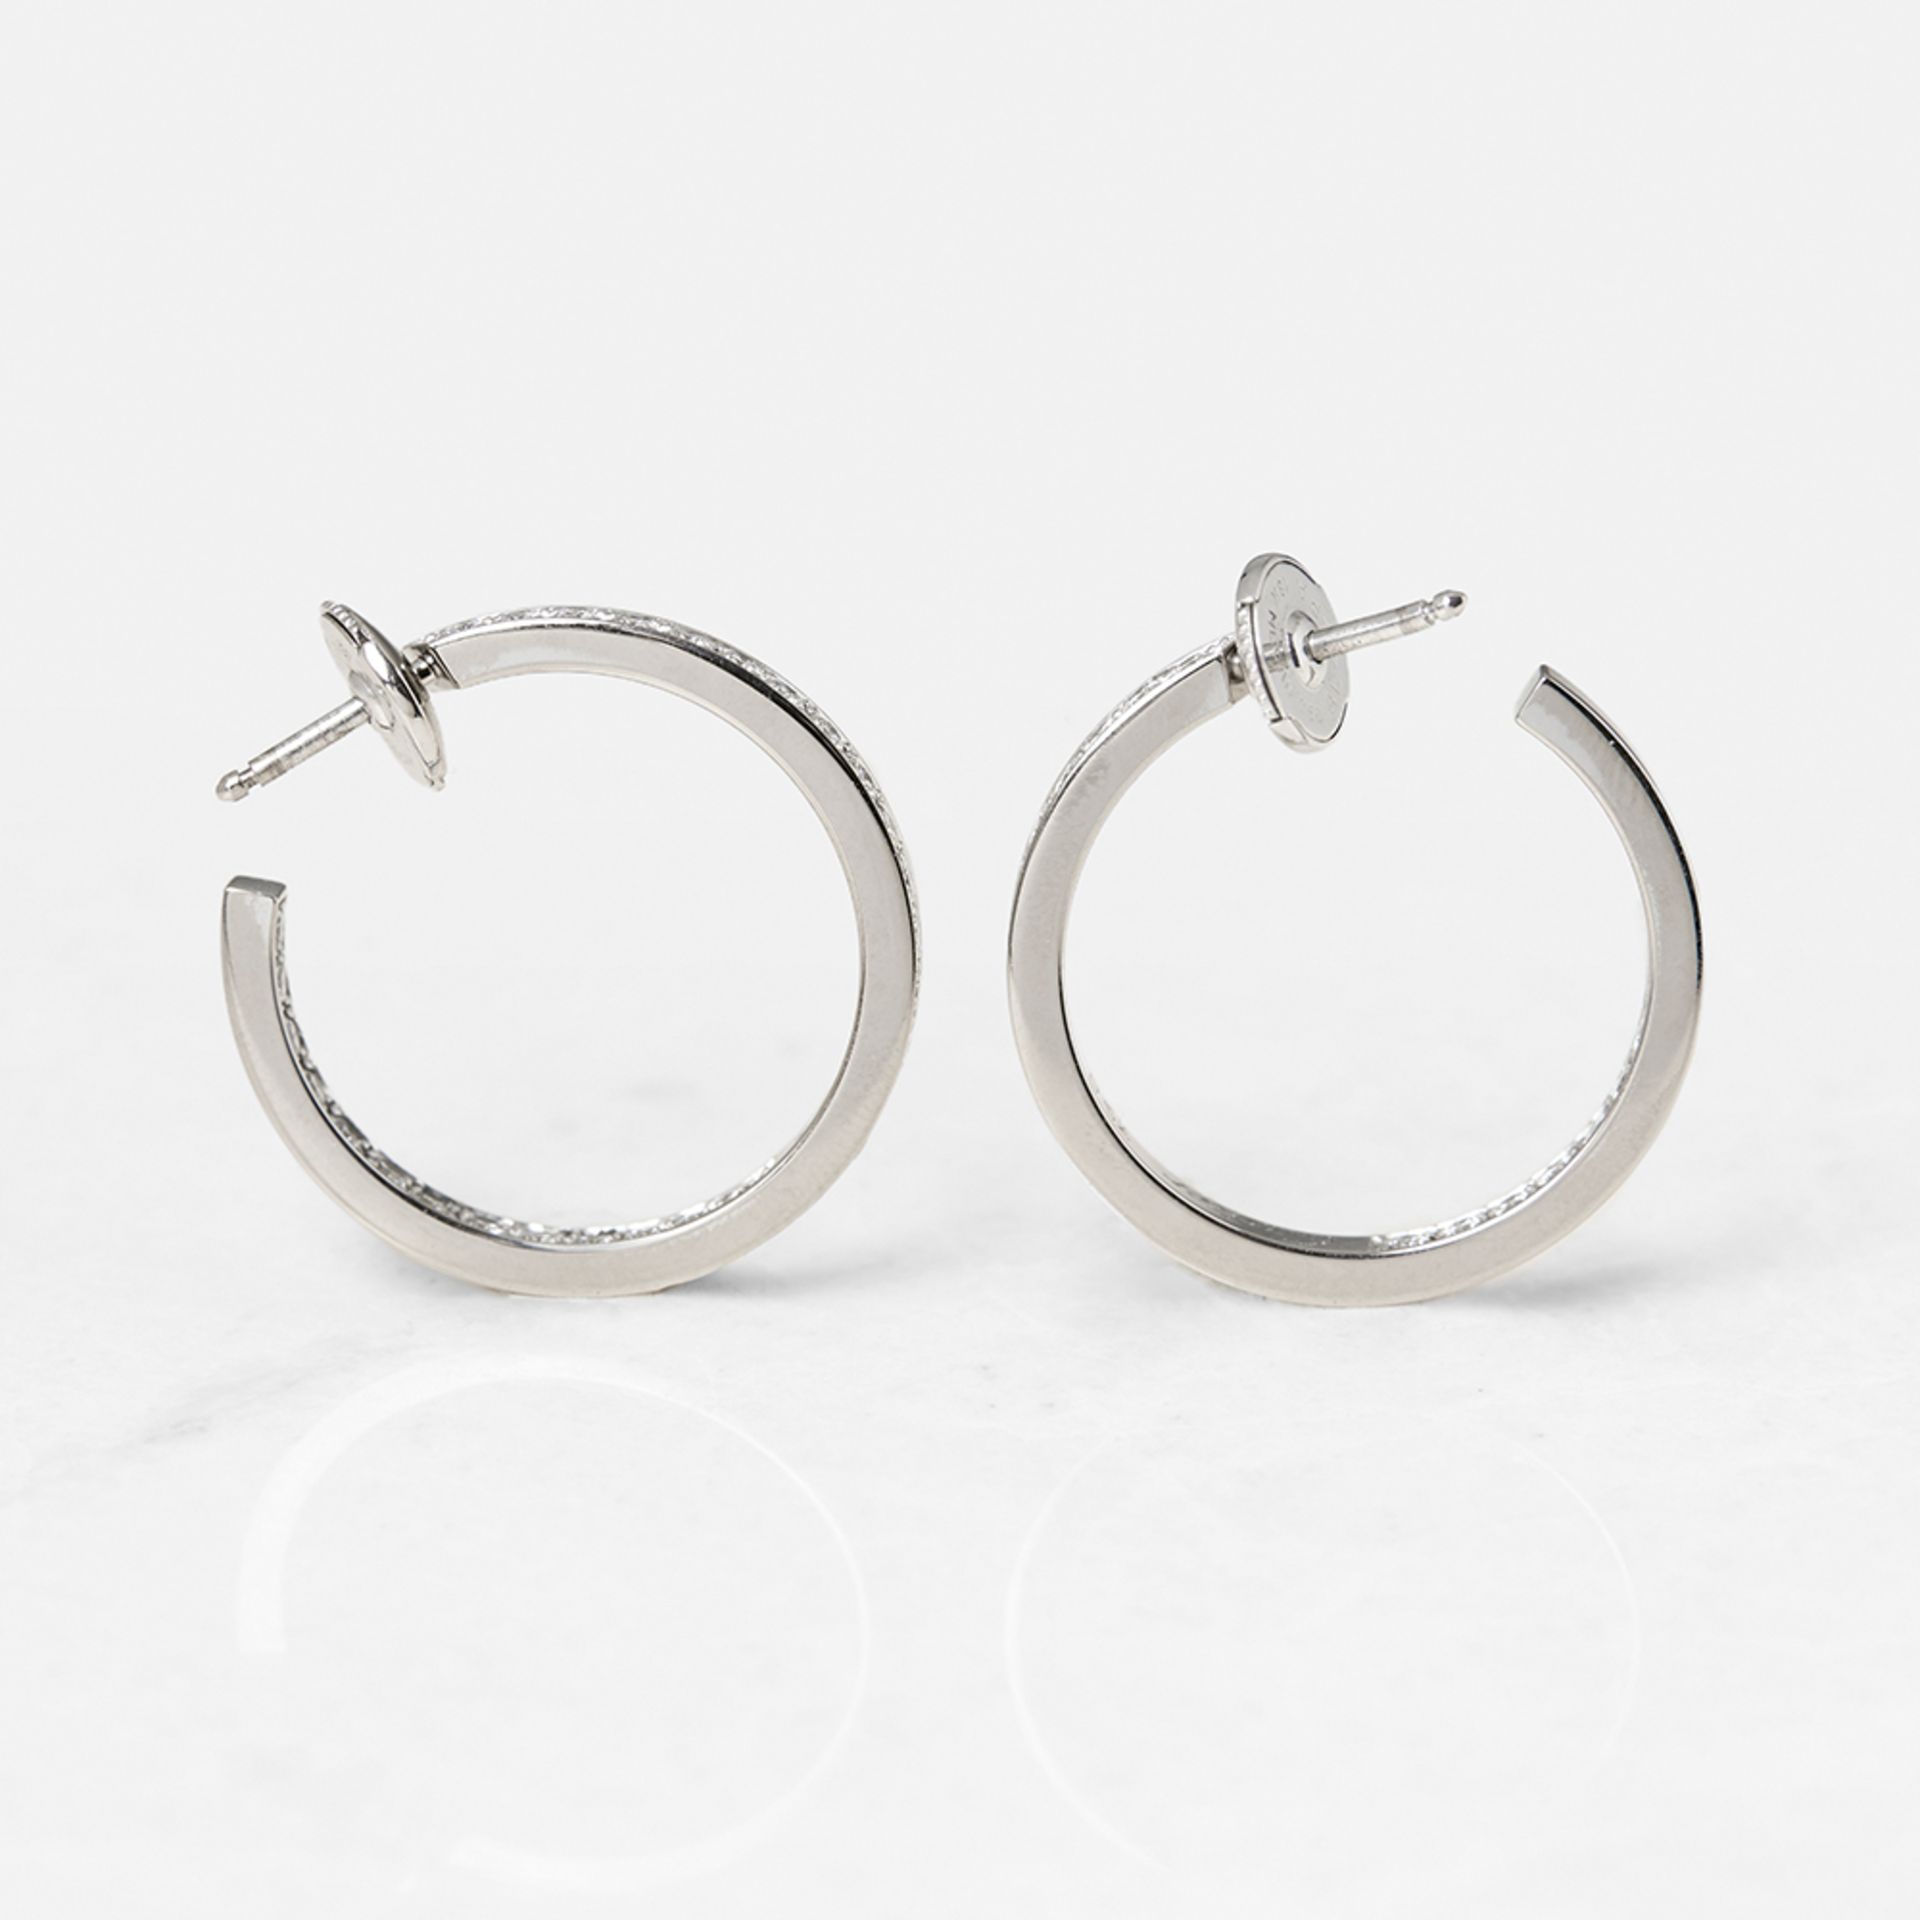 Cartier, 18k White Gold 1.20ct Diamond Inside Out Hoop Earrings - Image 6 of 14